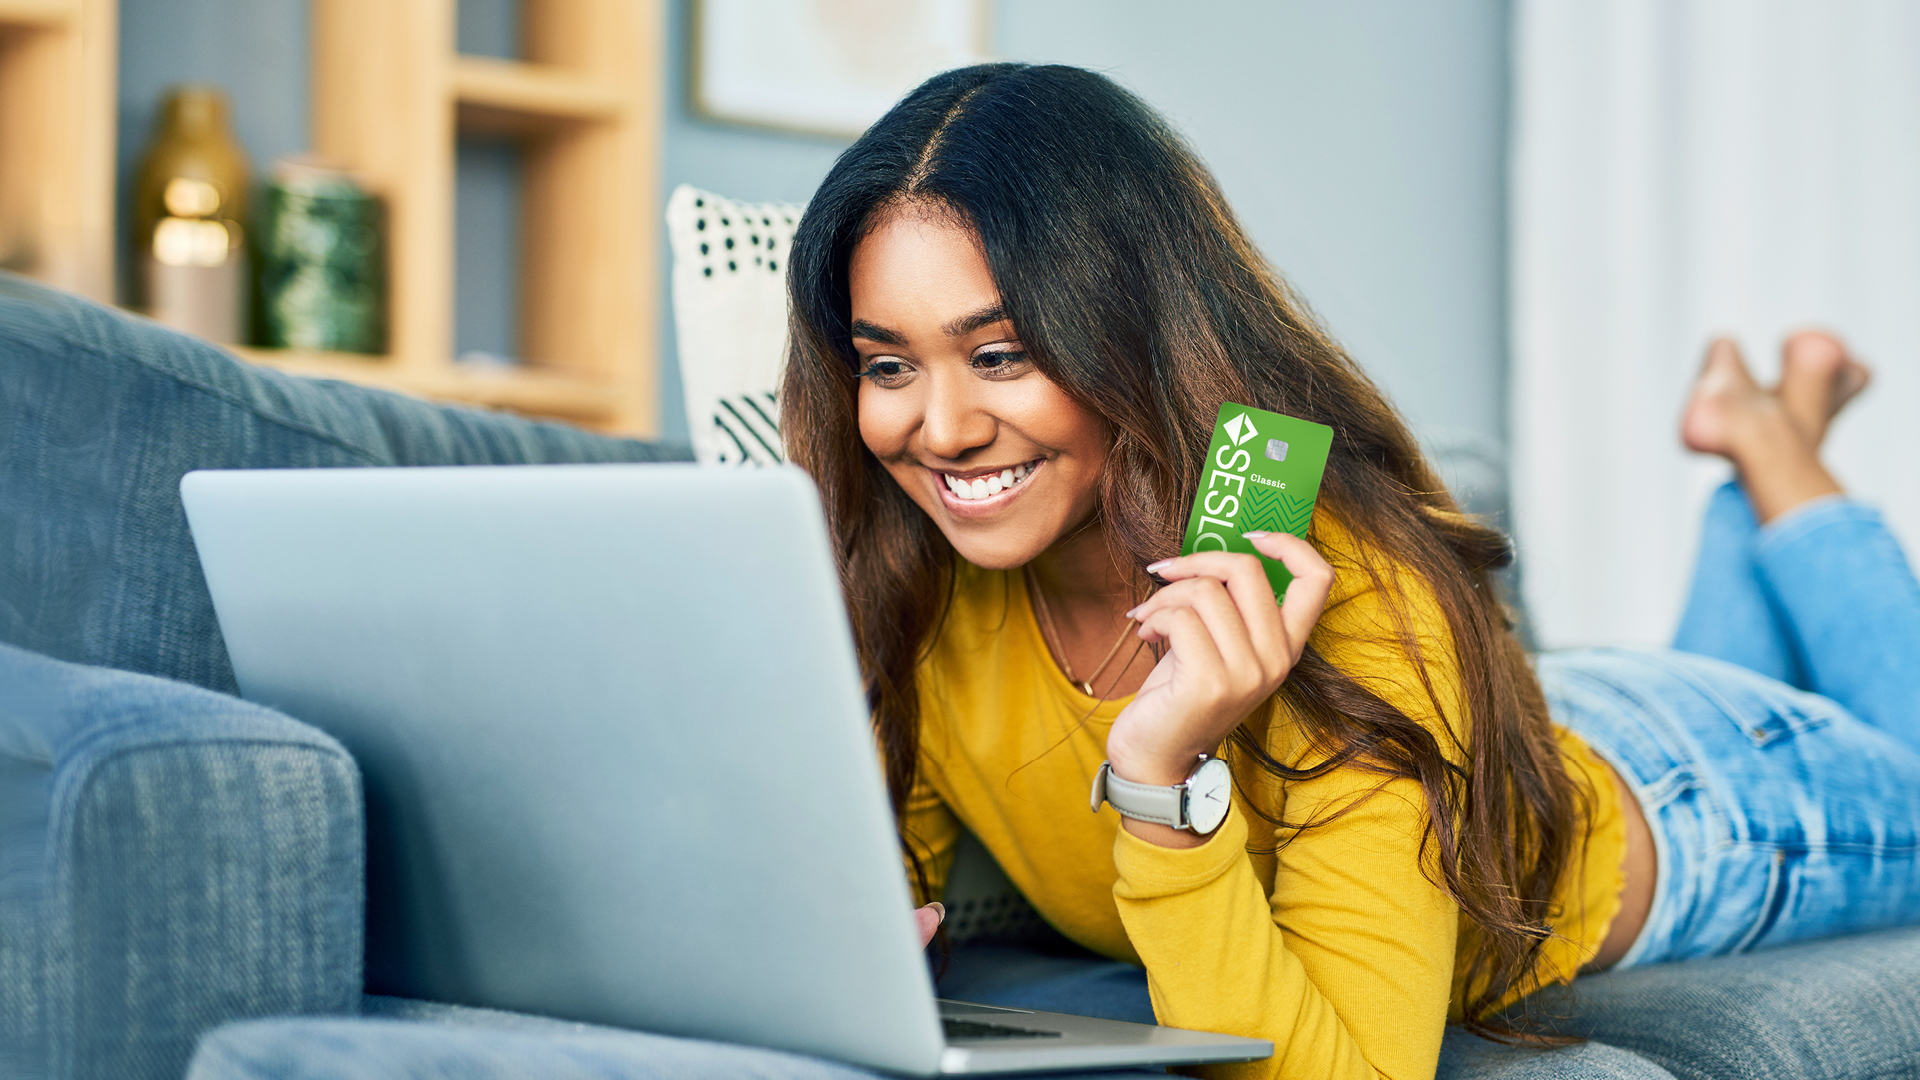 Woman on couch shopping online with her SESLOC Visa credit card